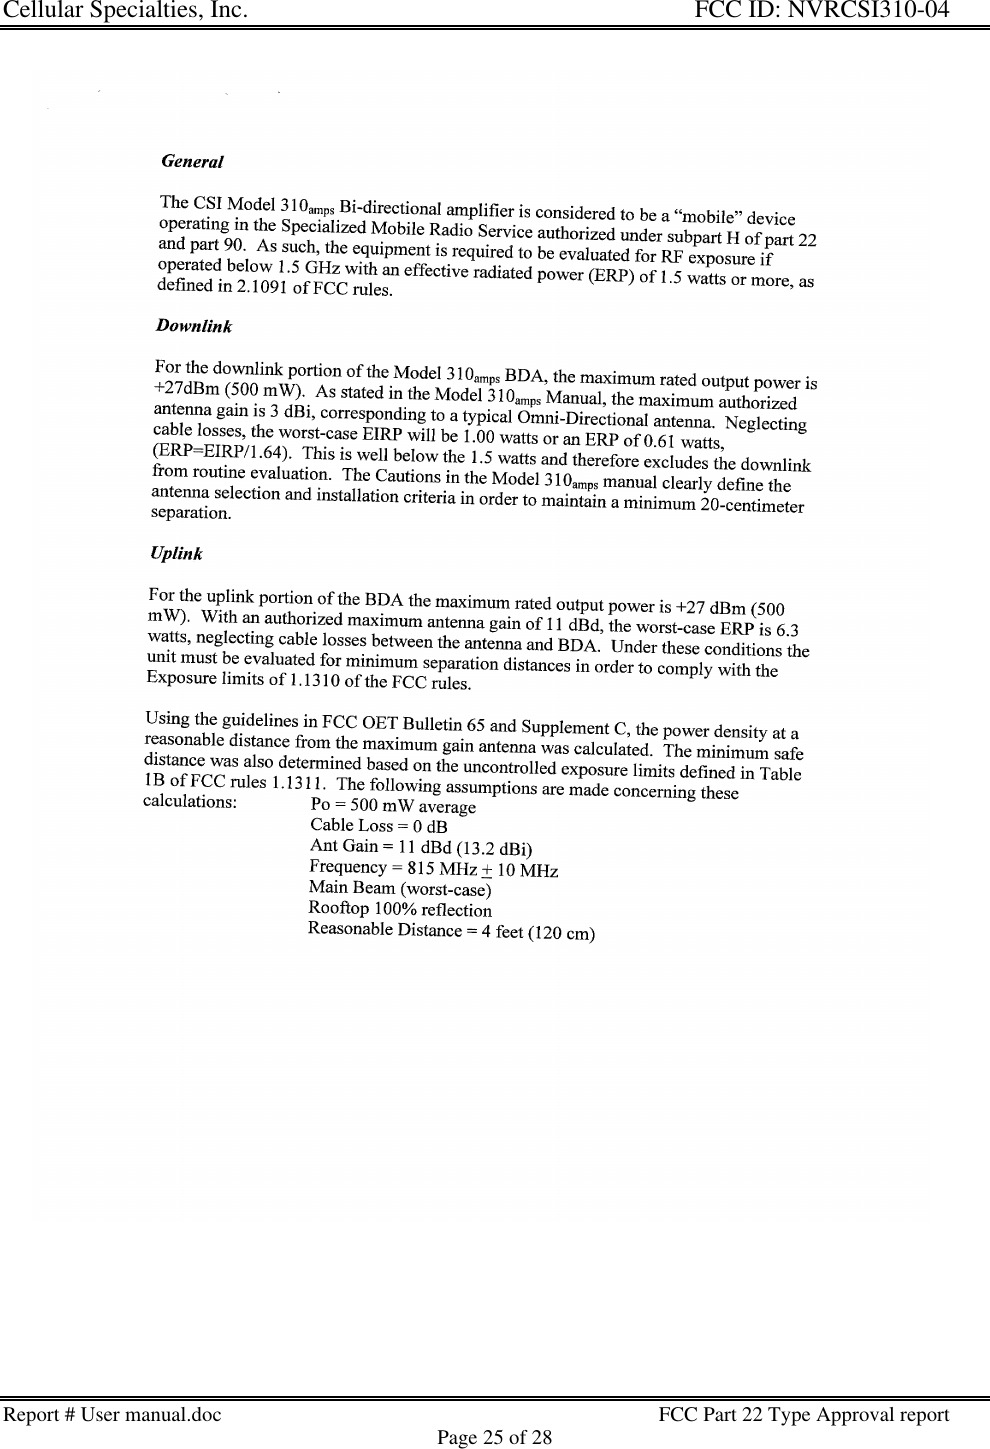 Cellular Specialties, Inc. FCC ID: NVRCSI310-04Report # User manual.doc FCC Part 22 Type Approval reportPage 25 of 28